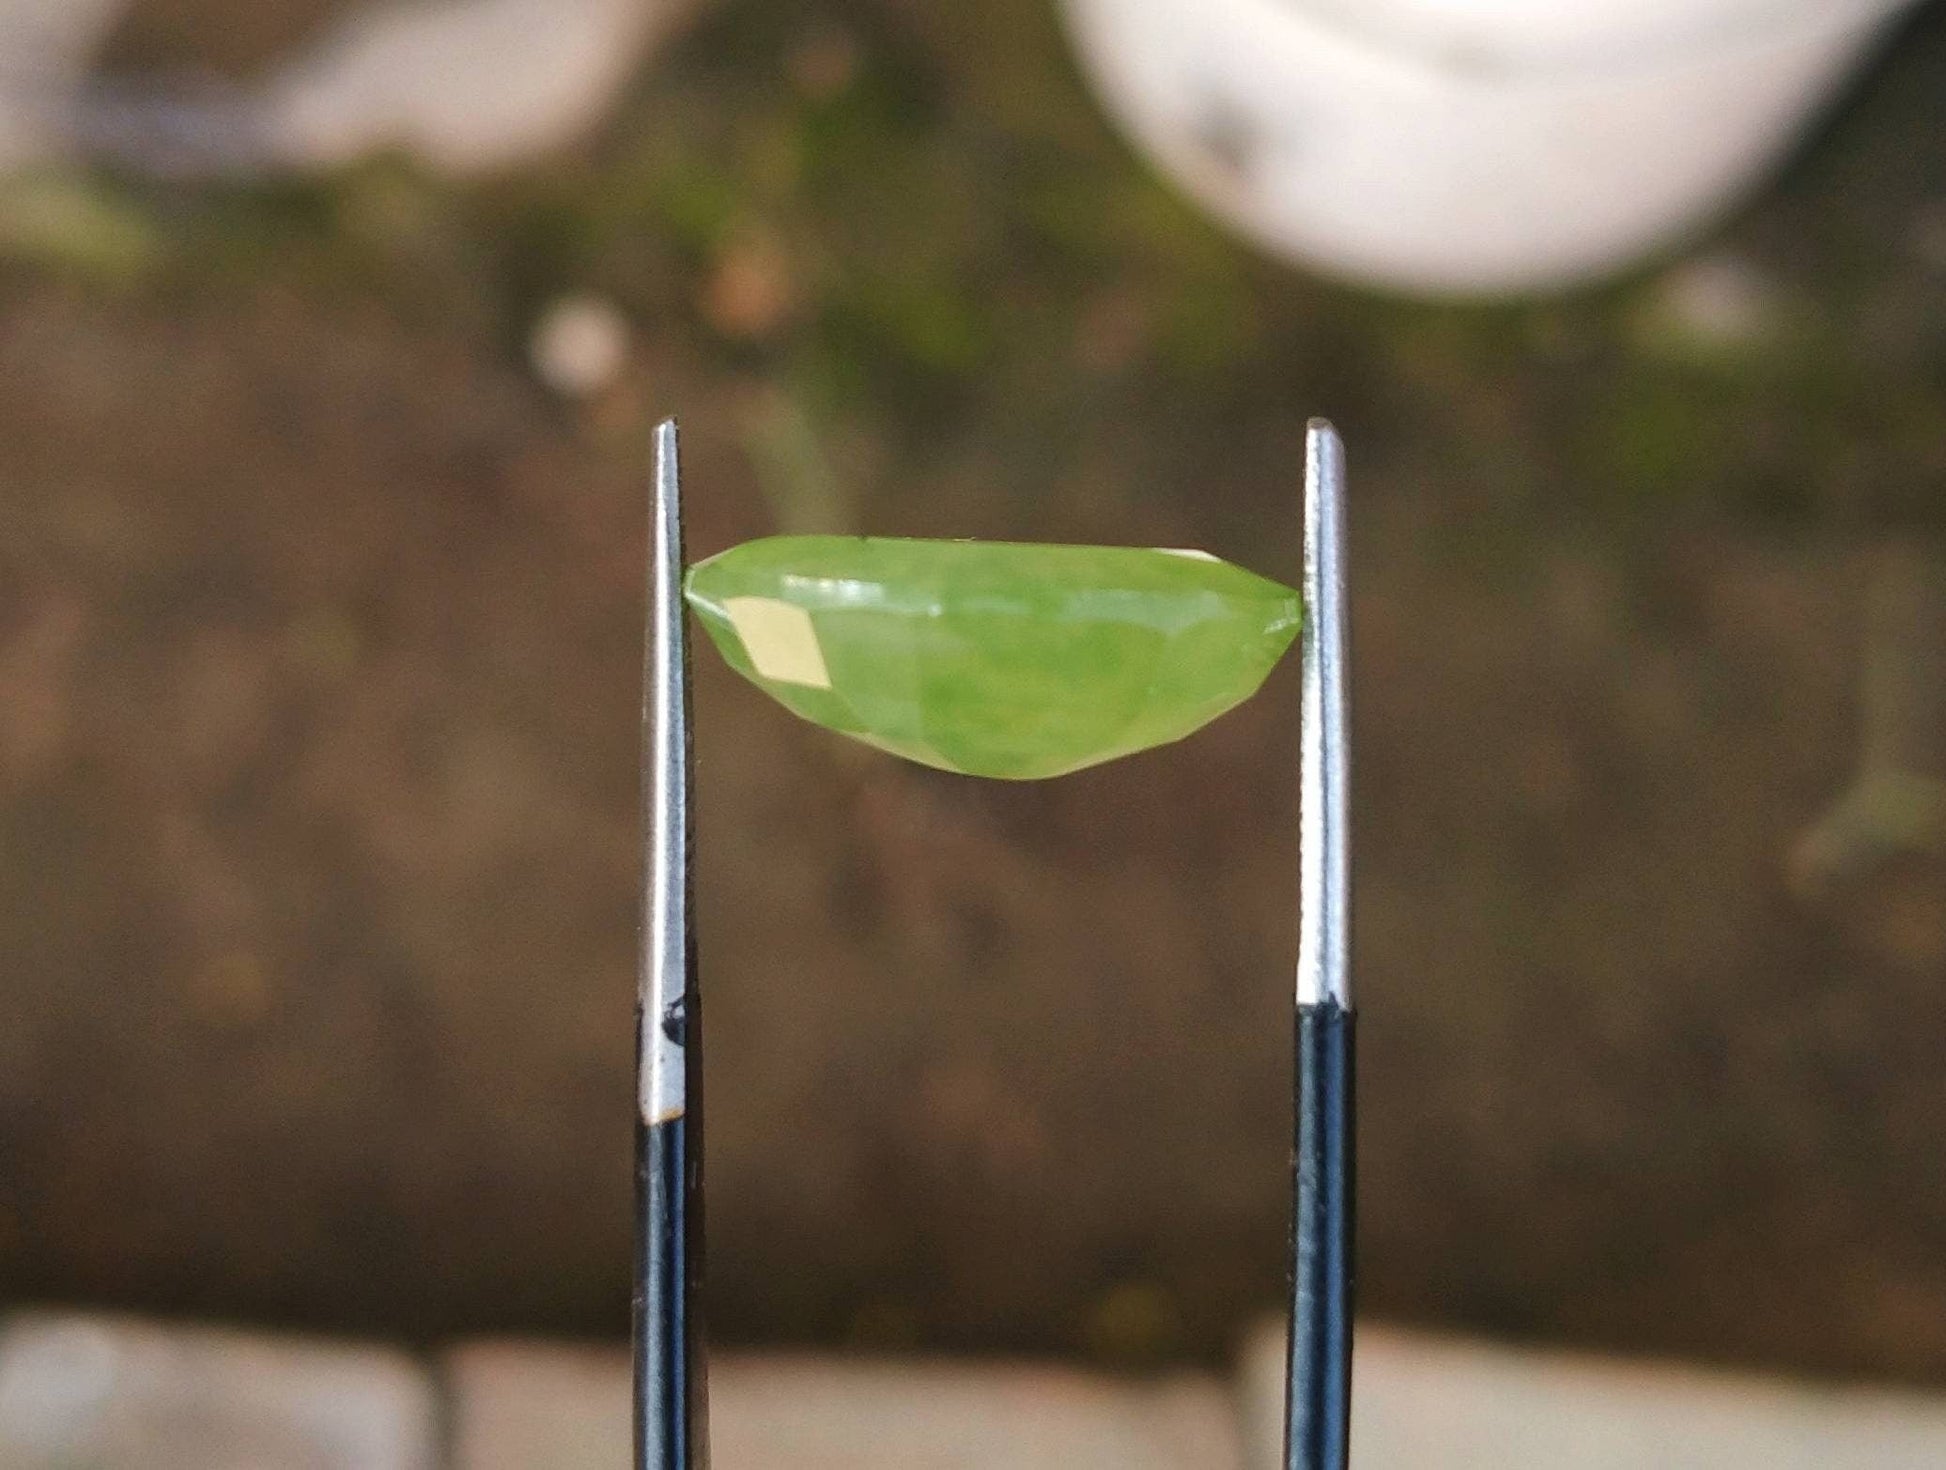 ARSAA GEMS AND MINERALSNatural fine quality beautiful 9.5 carats oval cut shape faceted green hydrograssular garnet gem - Premium  from ARSAA GEMS AND MINERALS - Just $19.00! Shop now at ARSAA GEMS AND MINERALS